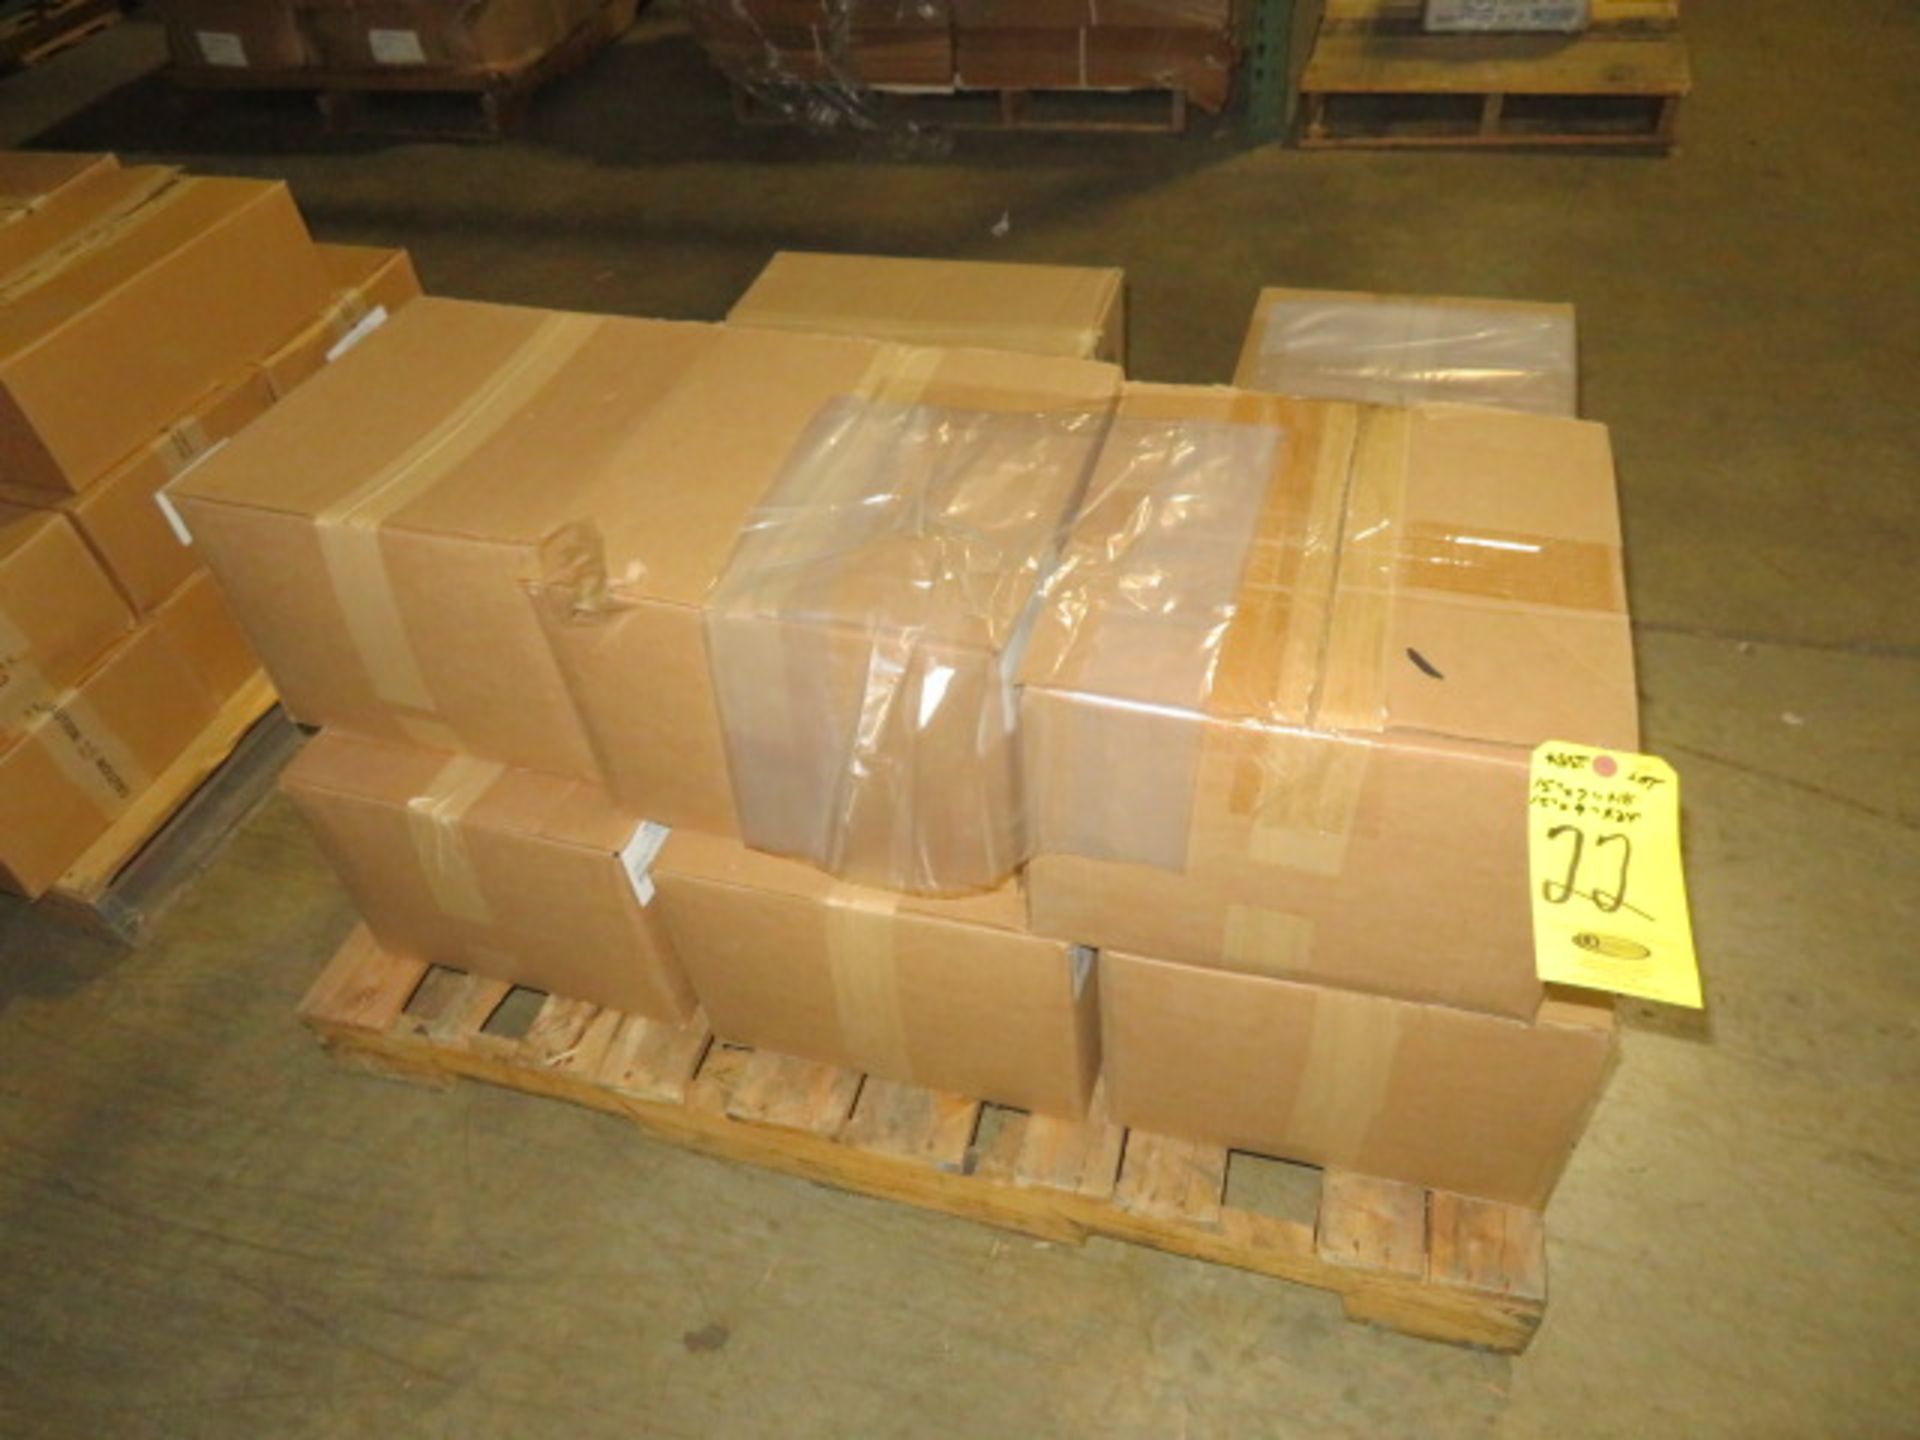 (11) BOXES 15 X 7 X 18 7 15 X 9 X 24 IN POLY UIRETHANE BAGS